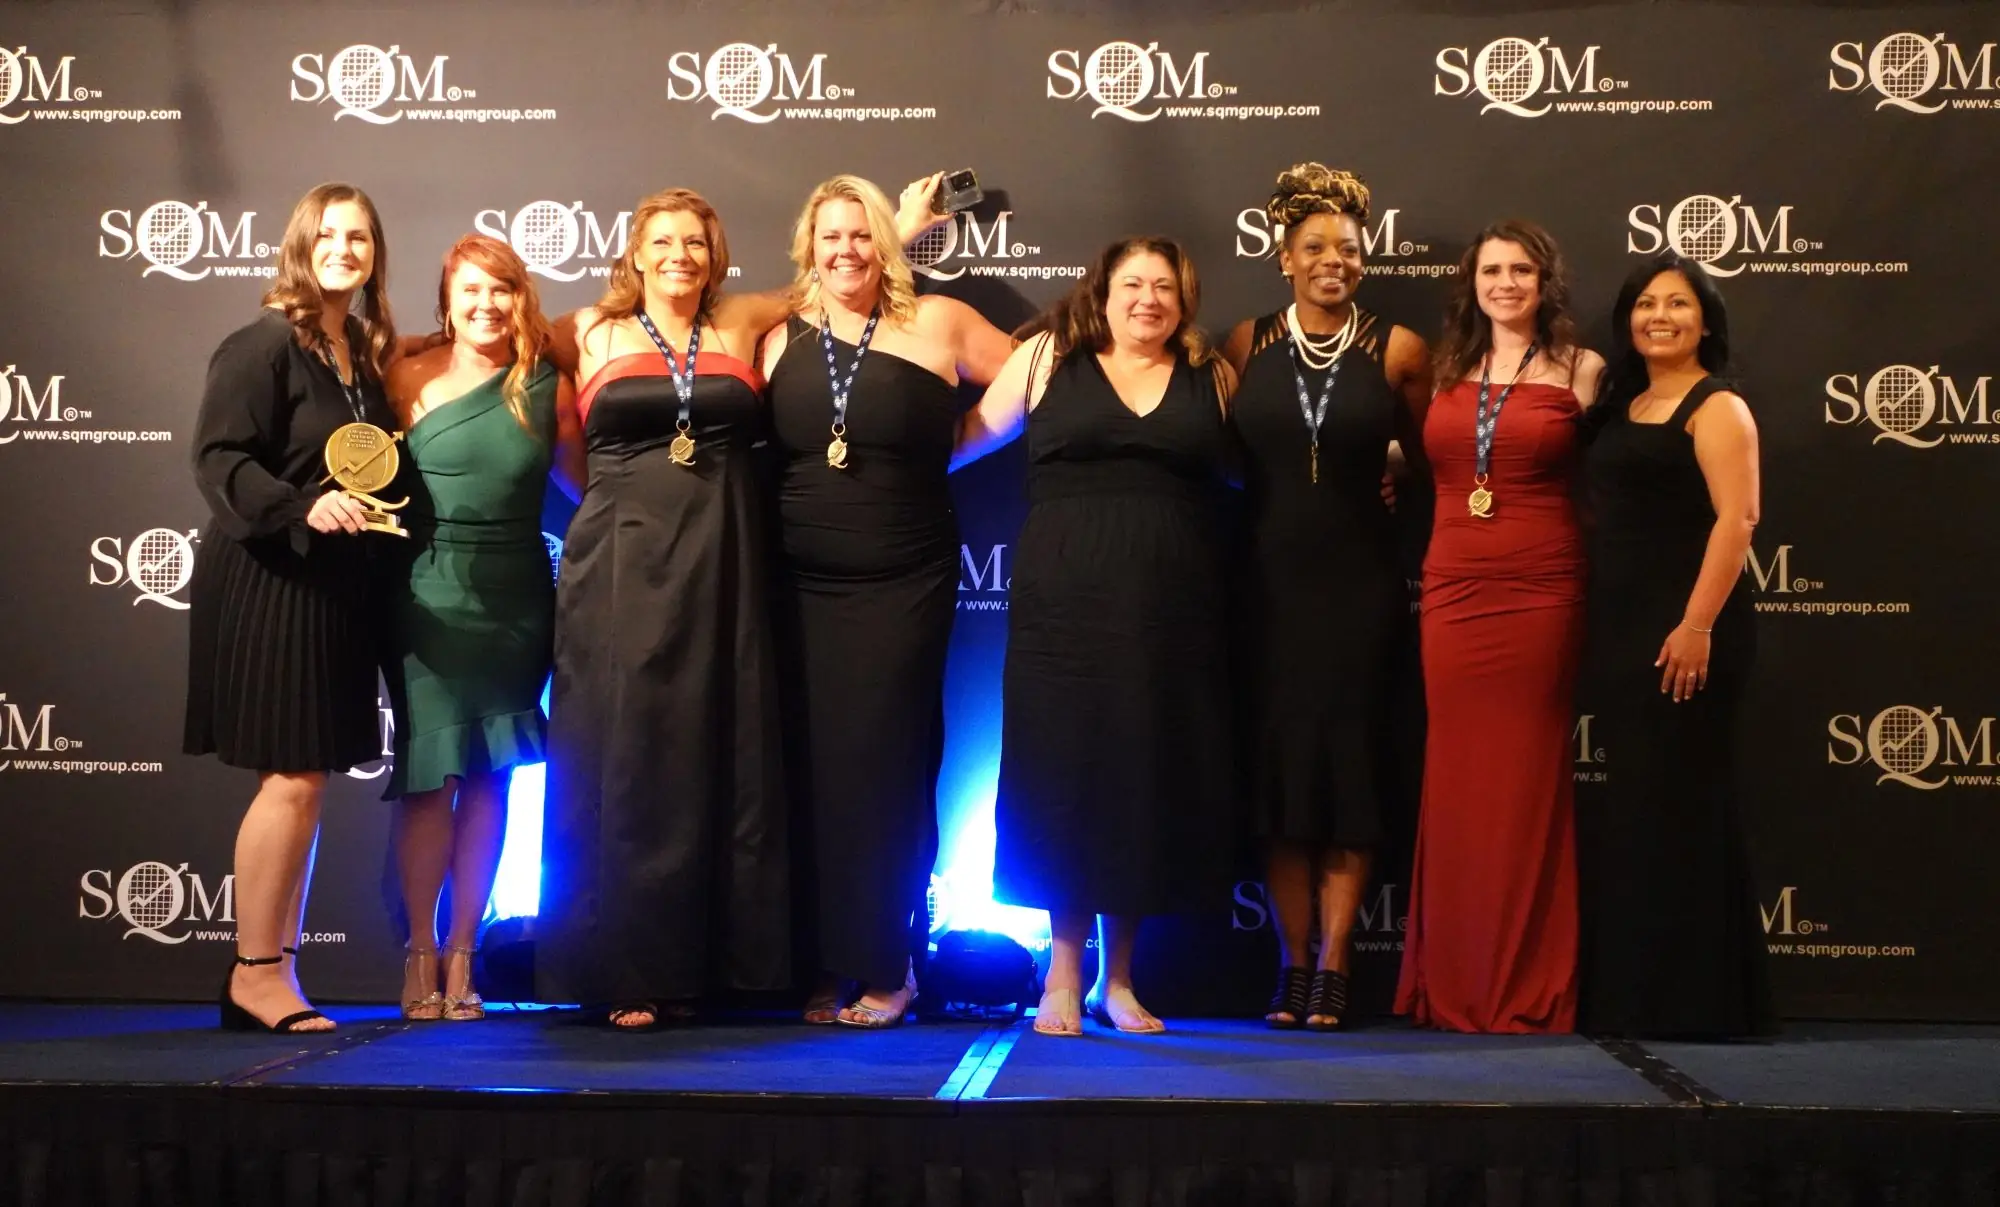 six women standing on a stage holding an award and wearing award medallions